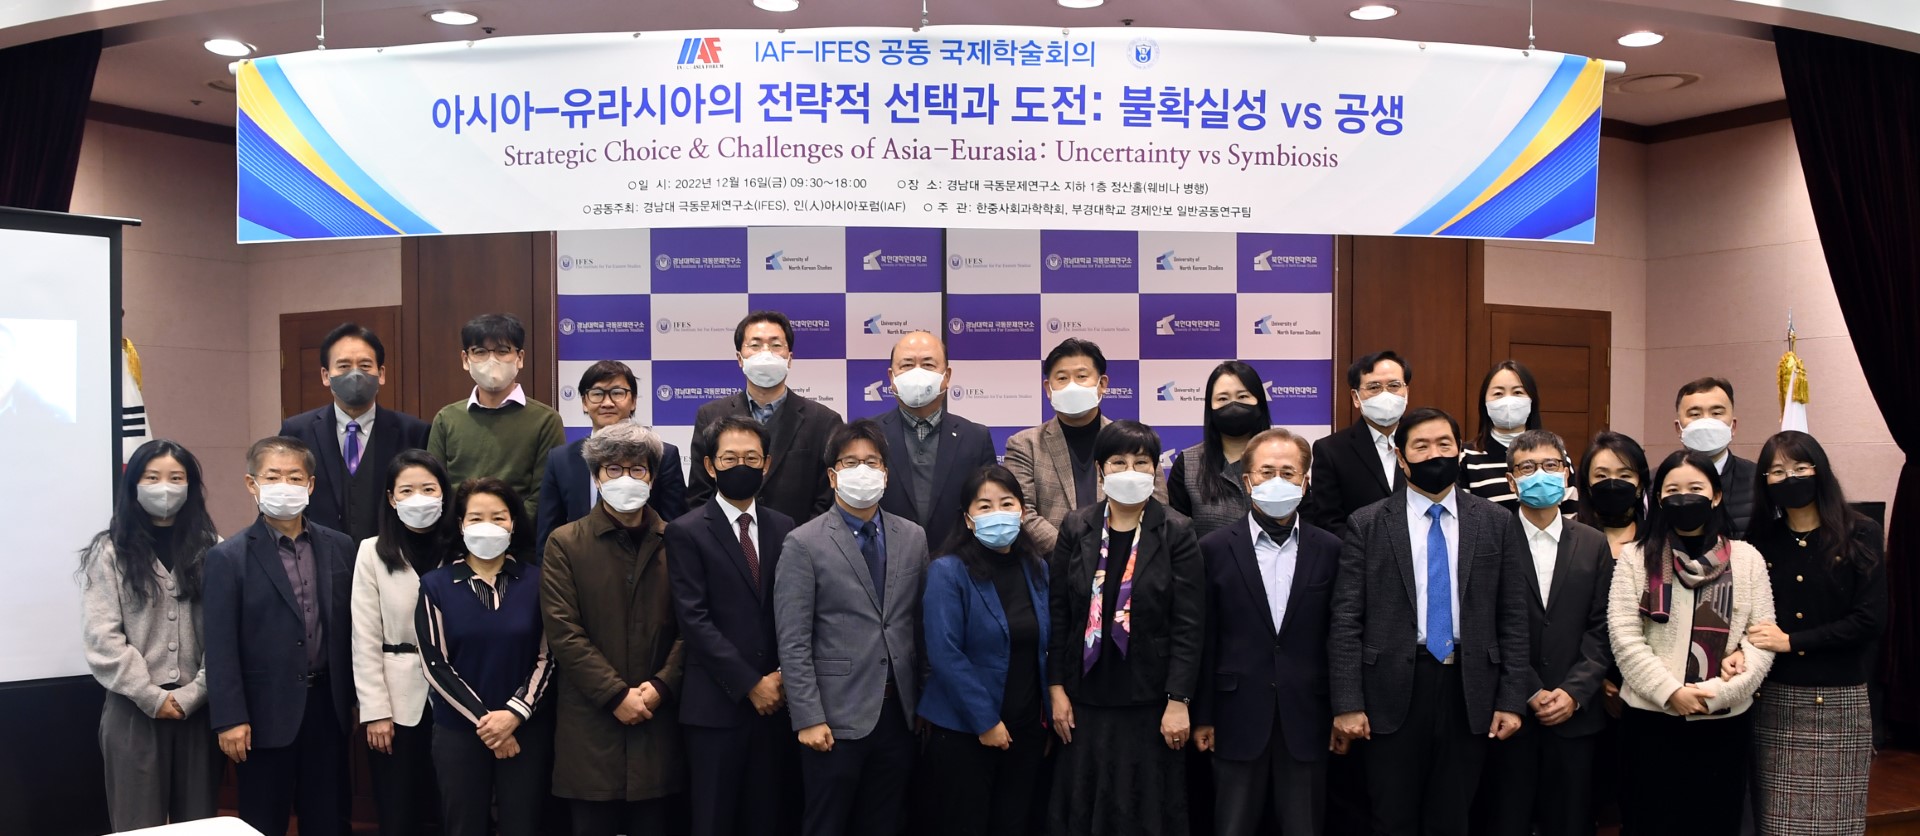 IFES Holds Joint Conference on Asia-Eurasia Issues 첨부 이미지